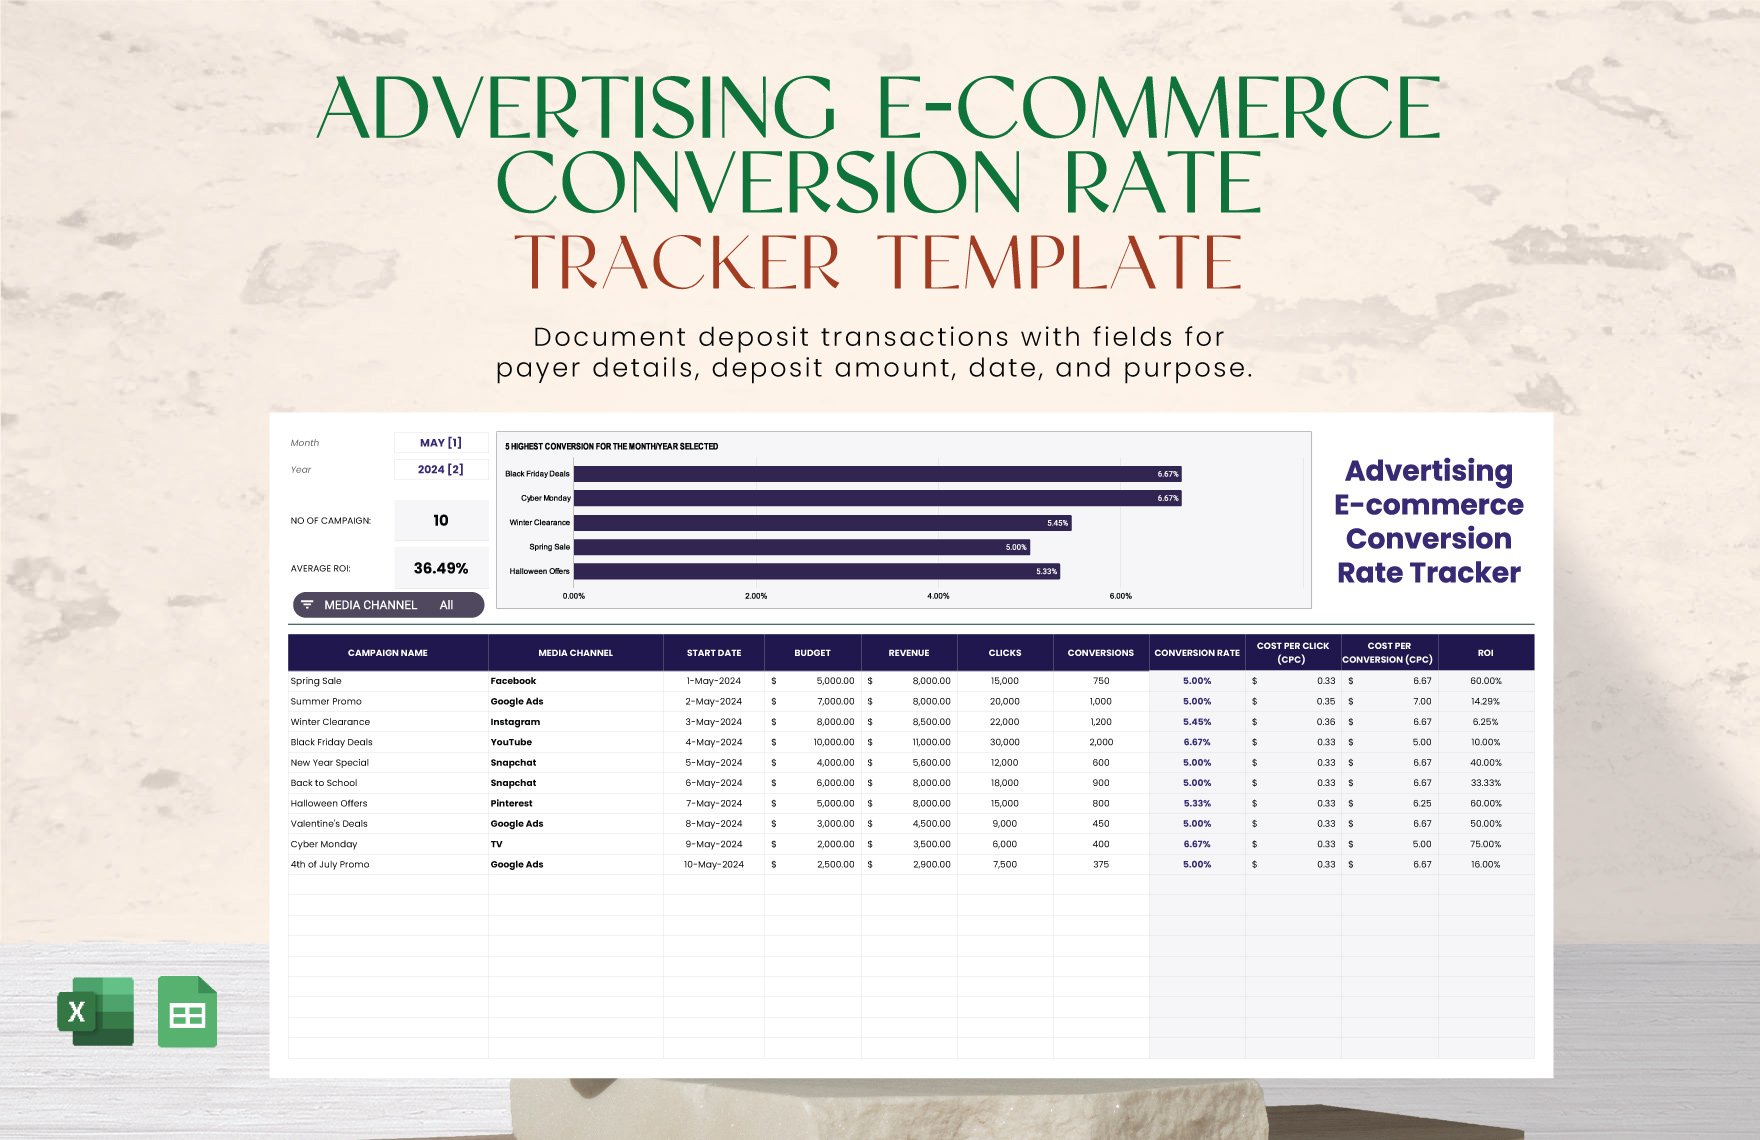 Advertising E-commerce Conversion Rate Tracker Template in Excel, Google Sheets